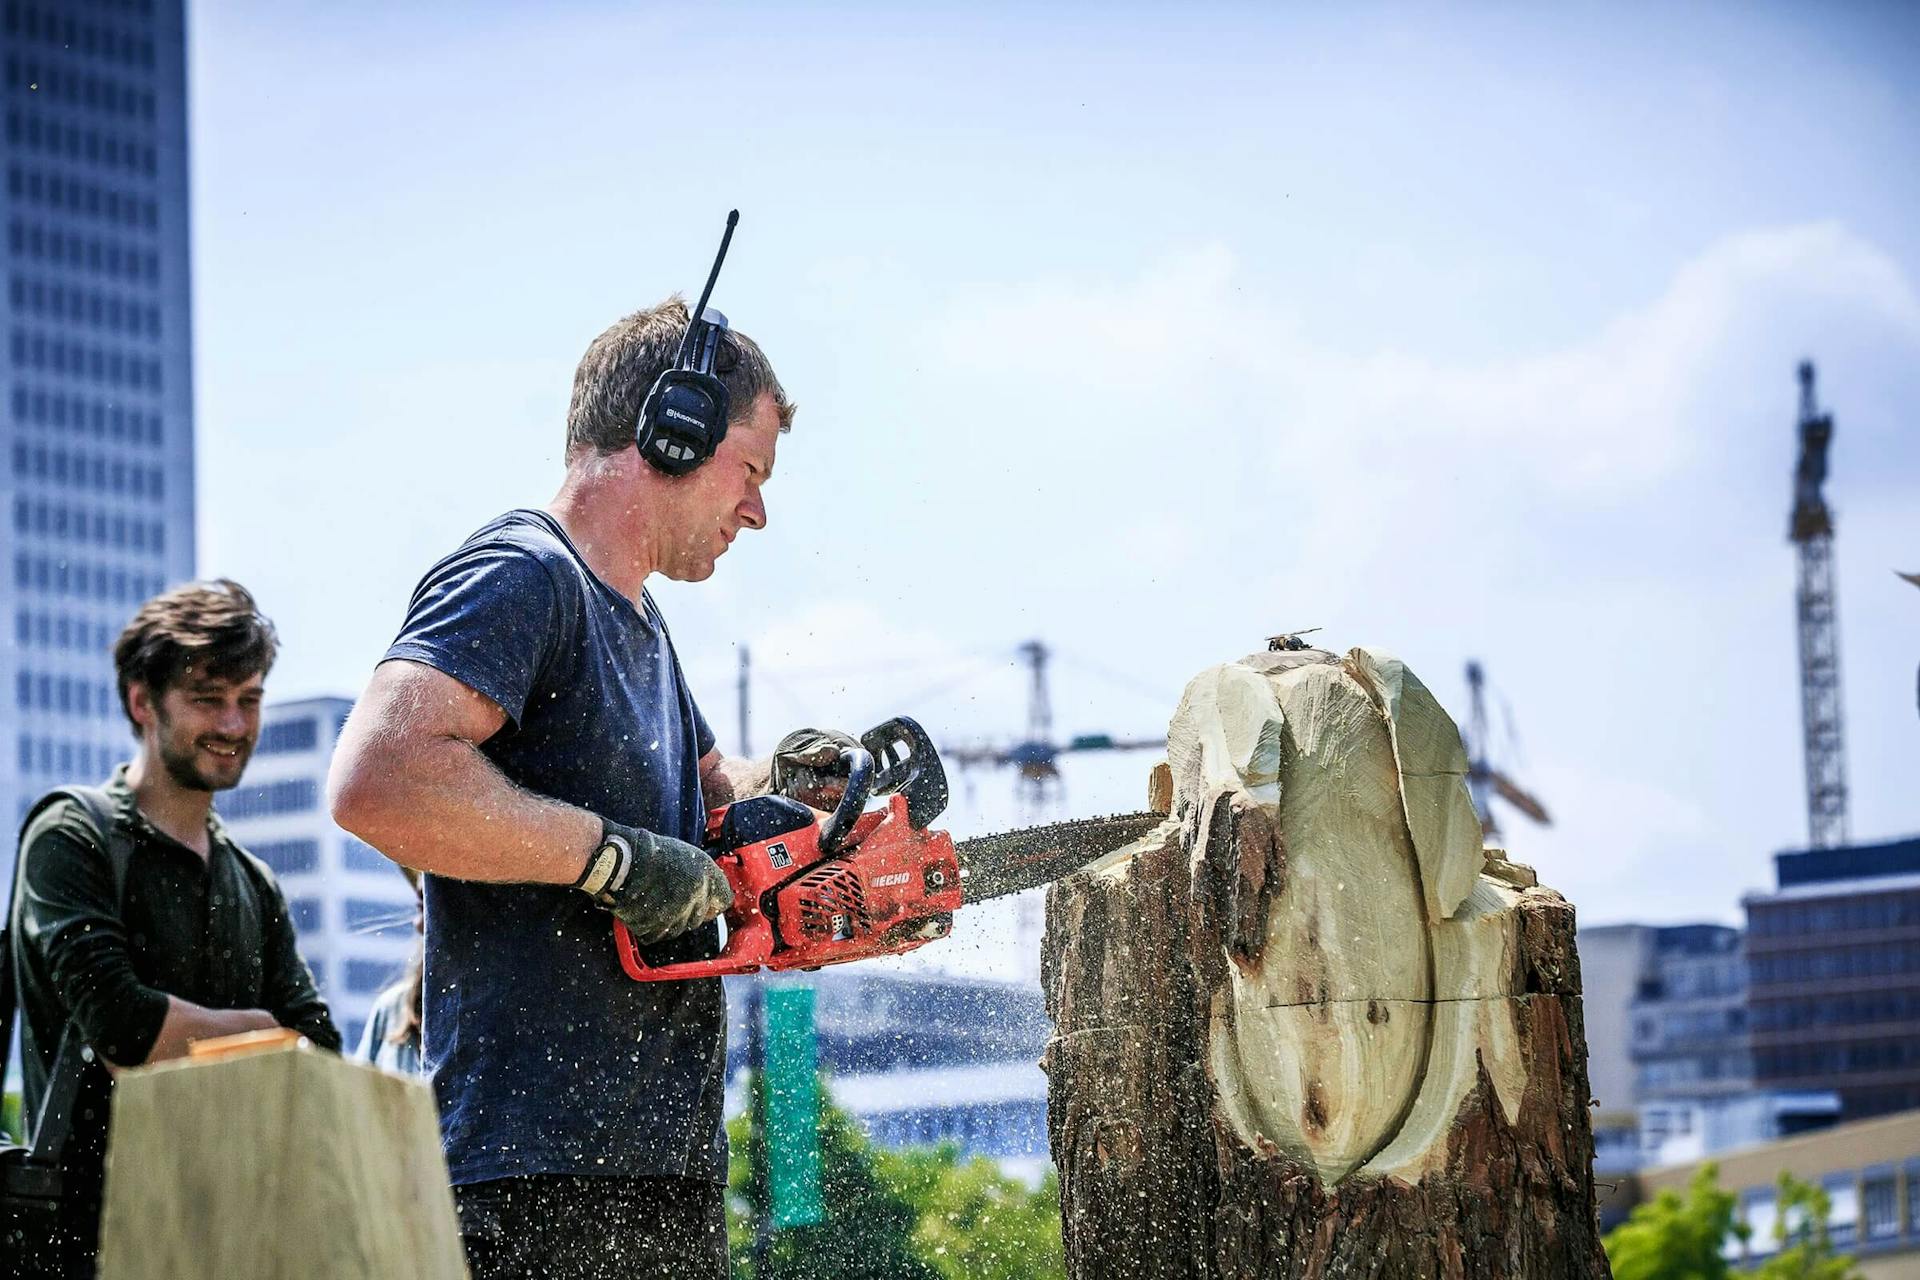 Dave Harmsworth (Treeworks) demonstrating his skills with the chainsaw. Photo: Matthijs Immink. 